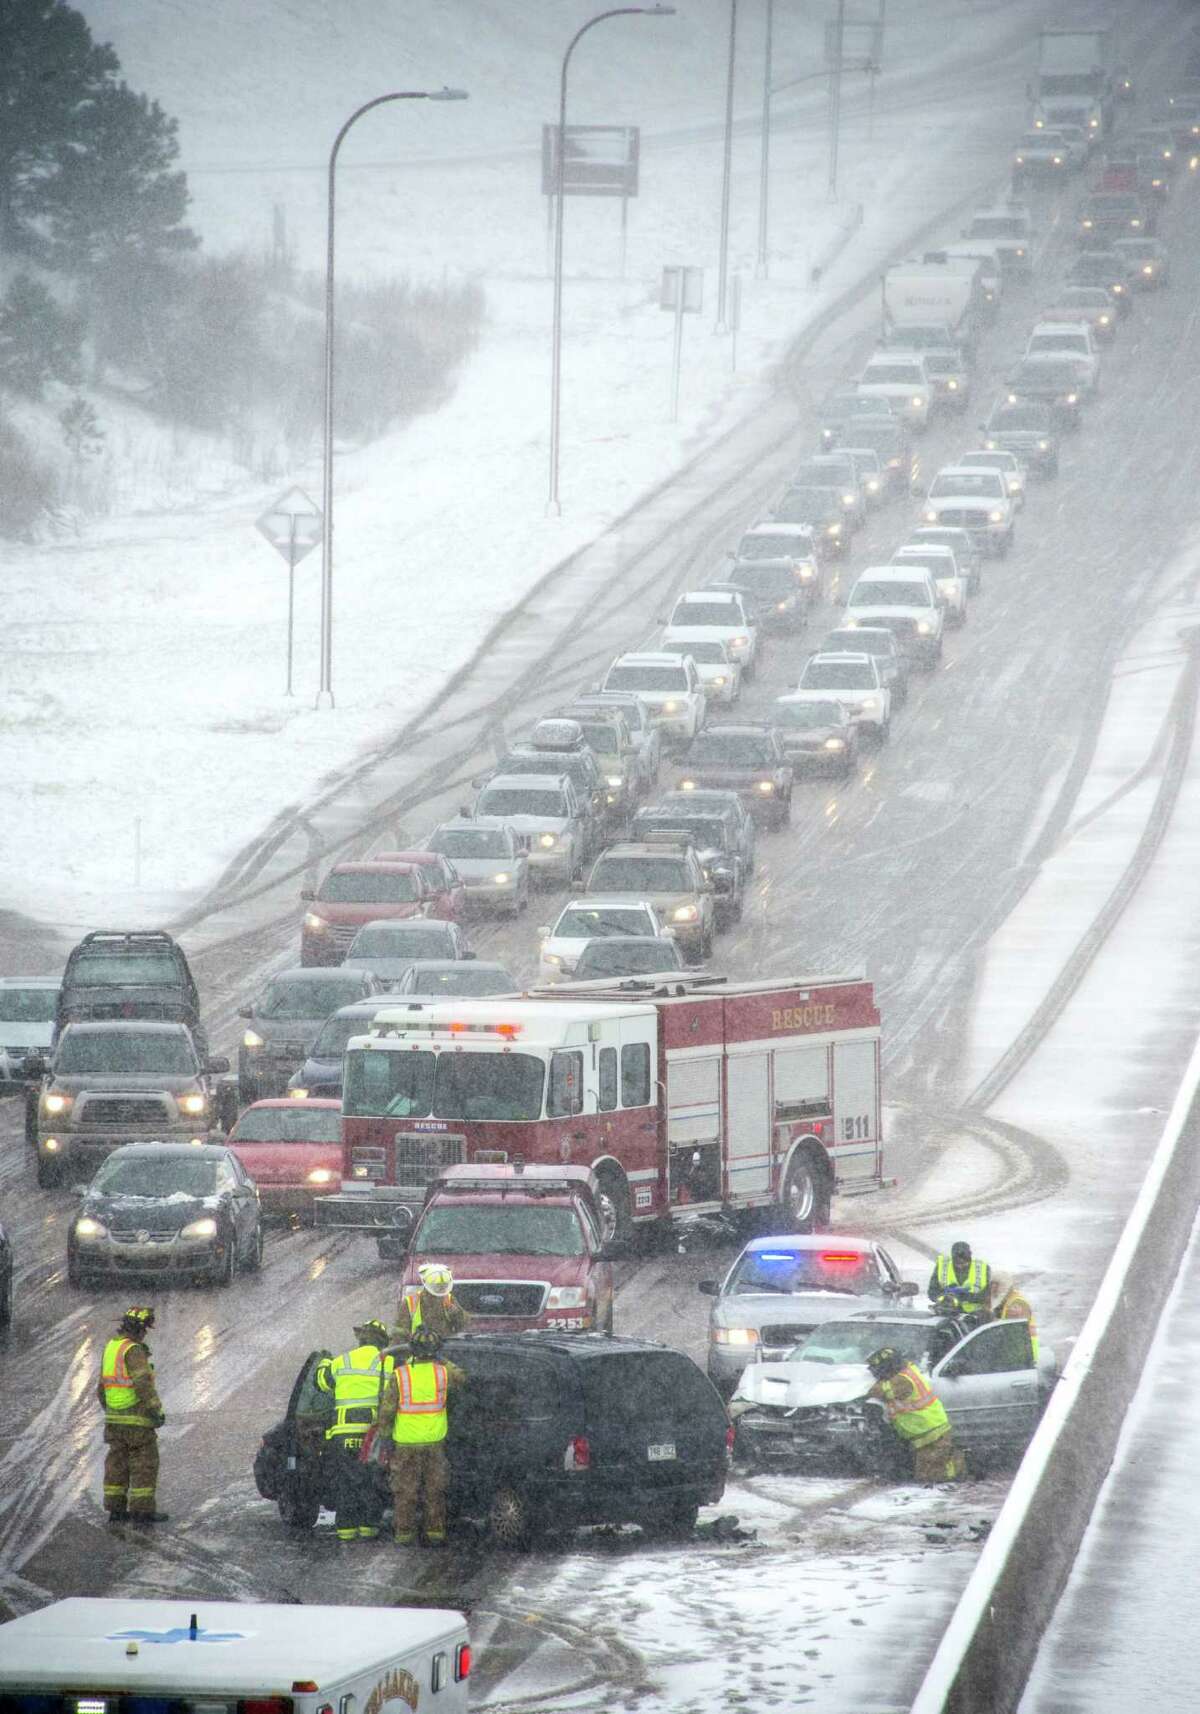 Firefighters work the scene of a two car injury accident that was one of many that slowed traffic on I-25 at the Monument exit north of Colorado Springs, Colo. as a spring snowstorm swept through Colorado Sunday, May 11, 2014. (AP Photo/The Gazette, Mark Reis)